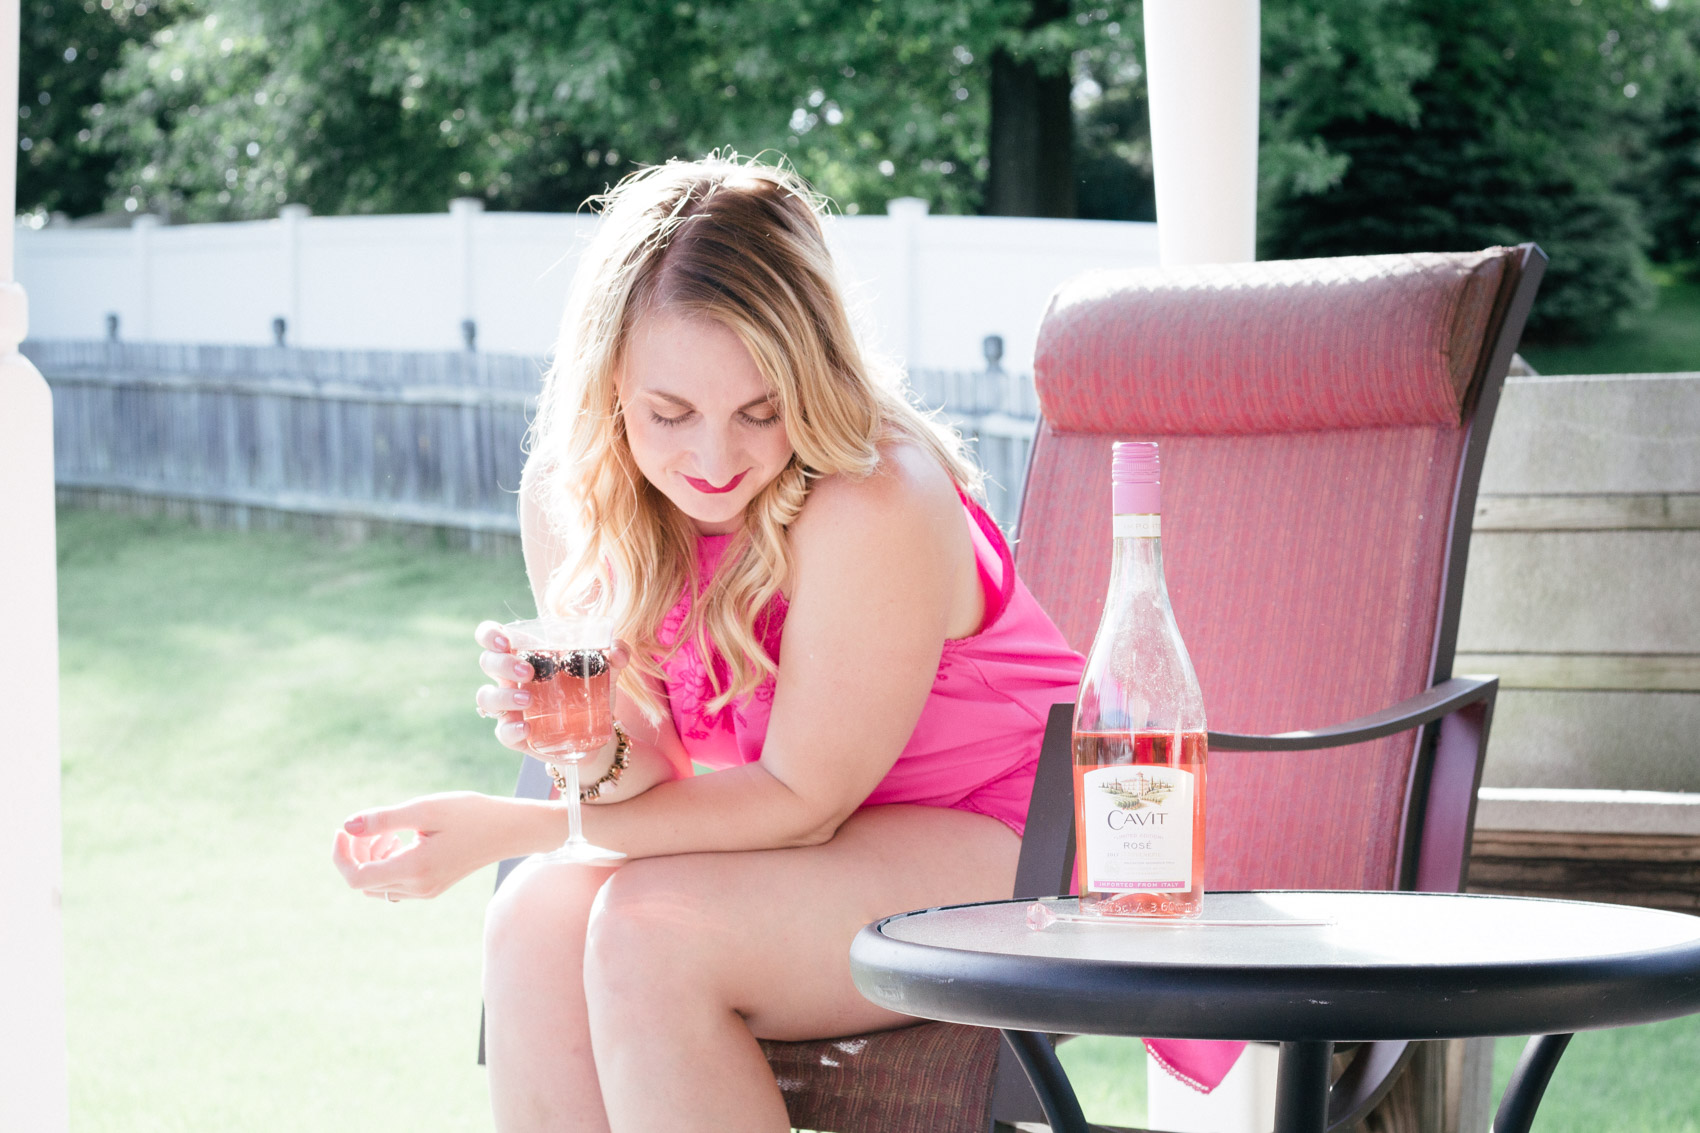 When it's your turn to host the summer entertaining or party, it can be a bit intimidating. That is, of course, only if you don't know about these 6 must-haves! From drinks to ambiance to clothing, you'll find a little bit of everything in here to have your guests (and you) craving more time on your deck!